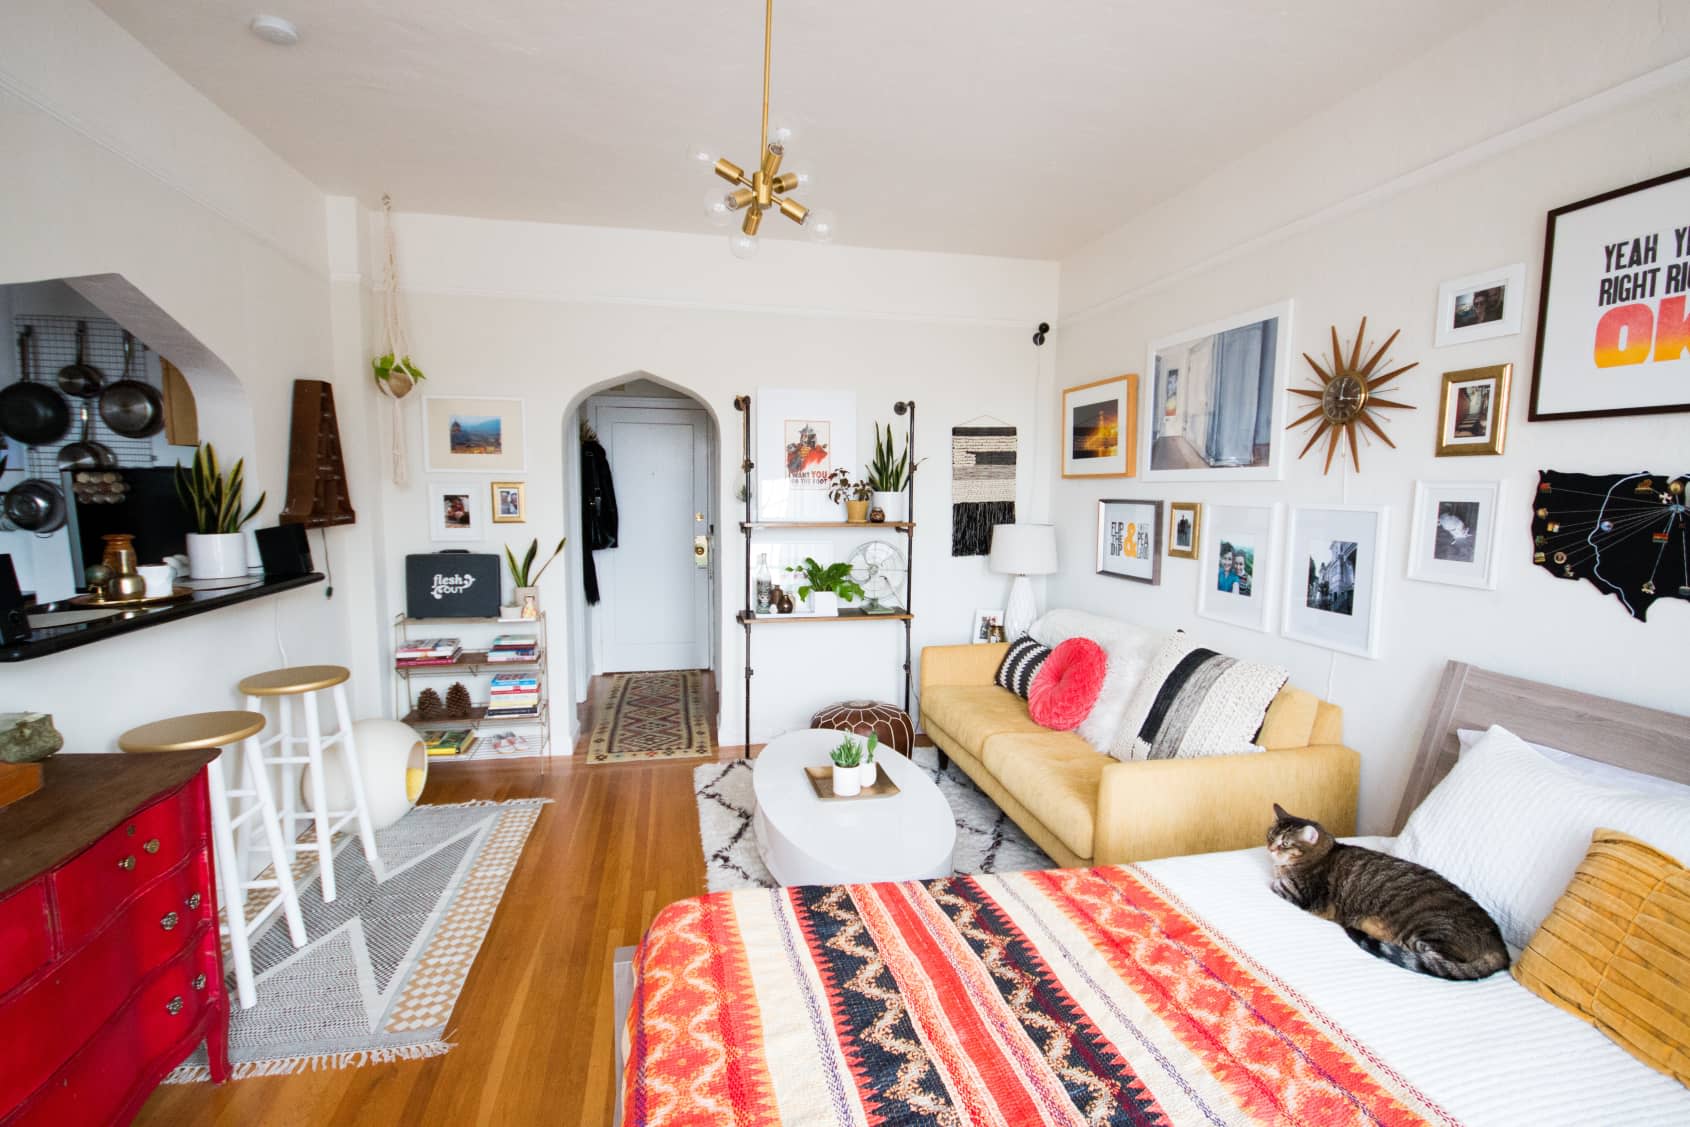 House Tour: A Colorful 400 Square Foot Studio Apartment | Apartment Therapy